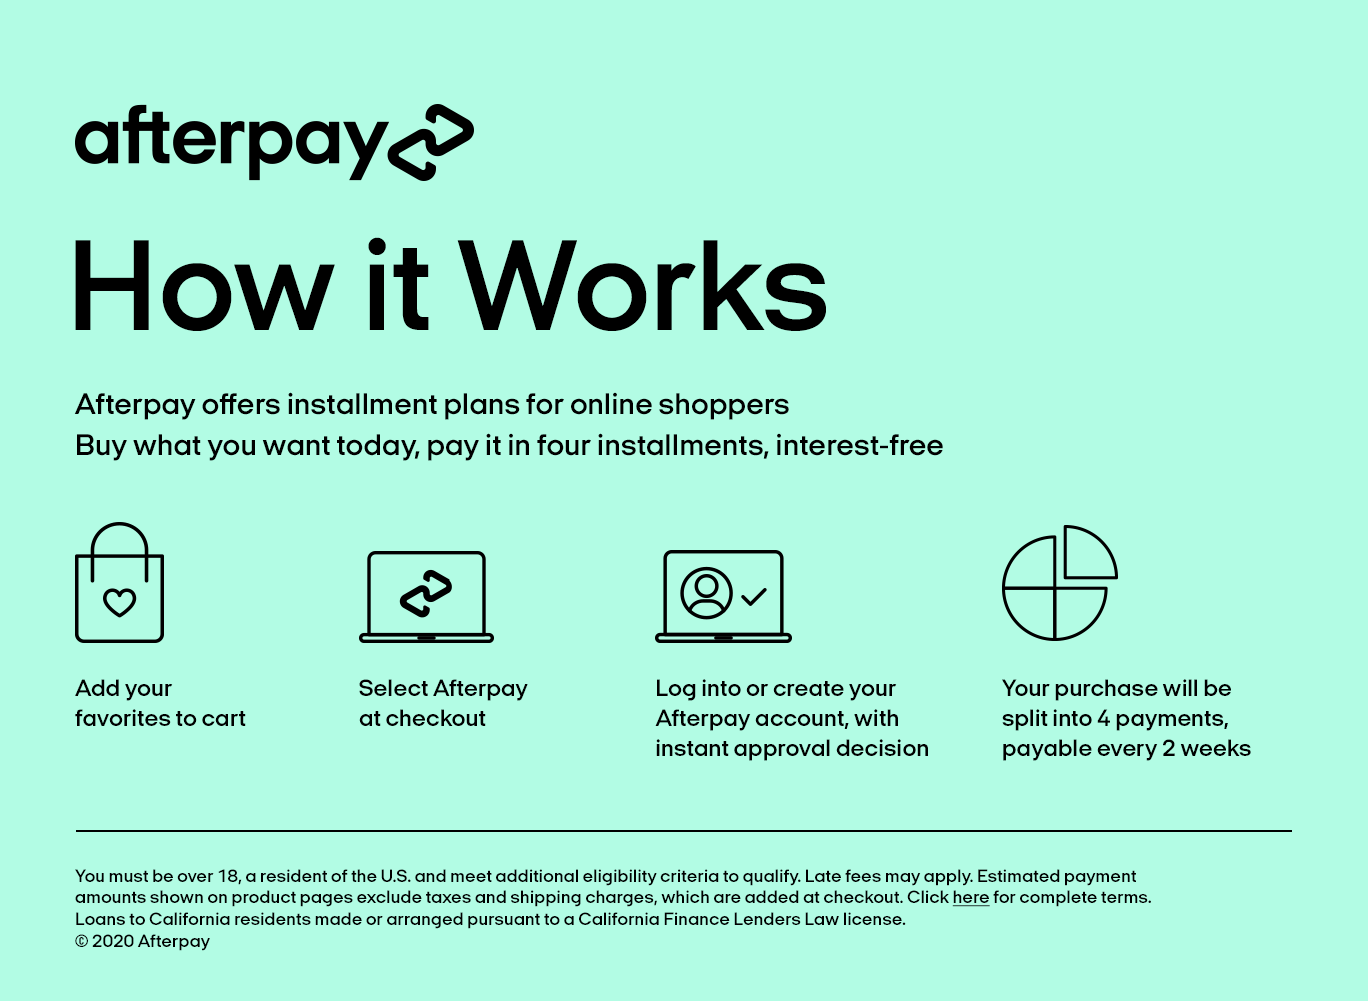 We are excited to add this option. Afterpay coming your way! #afterpay